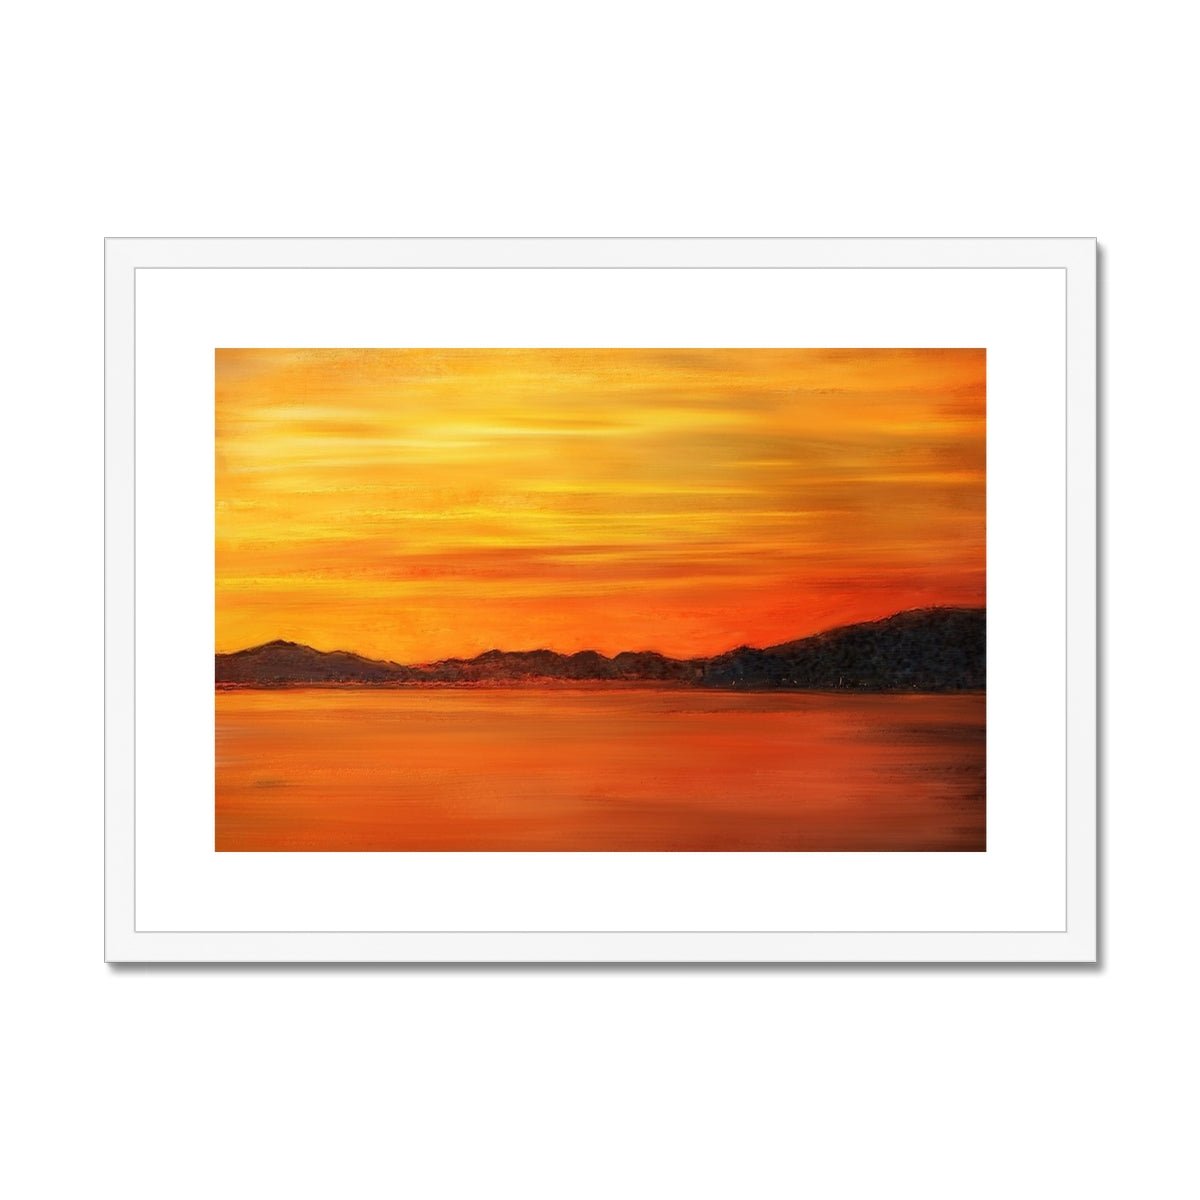 Loch Fyne Sunset Painting | Framed & Mounted Prints From Scotland-Framed & Mounted Prints-Scottish Lochs & Mountains Art Gallery-A2 Landscape-White Frame-Paintings, Prints, Homeware, Art Gifts From Scotland By Scottish Artist Kevin Hunter